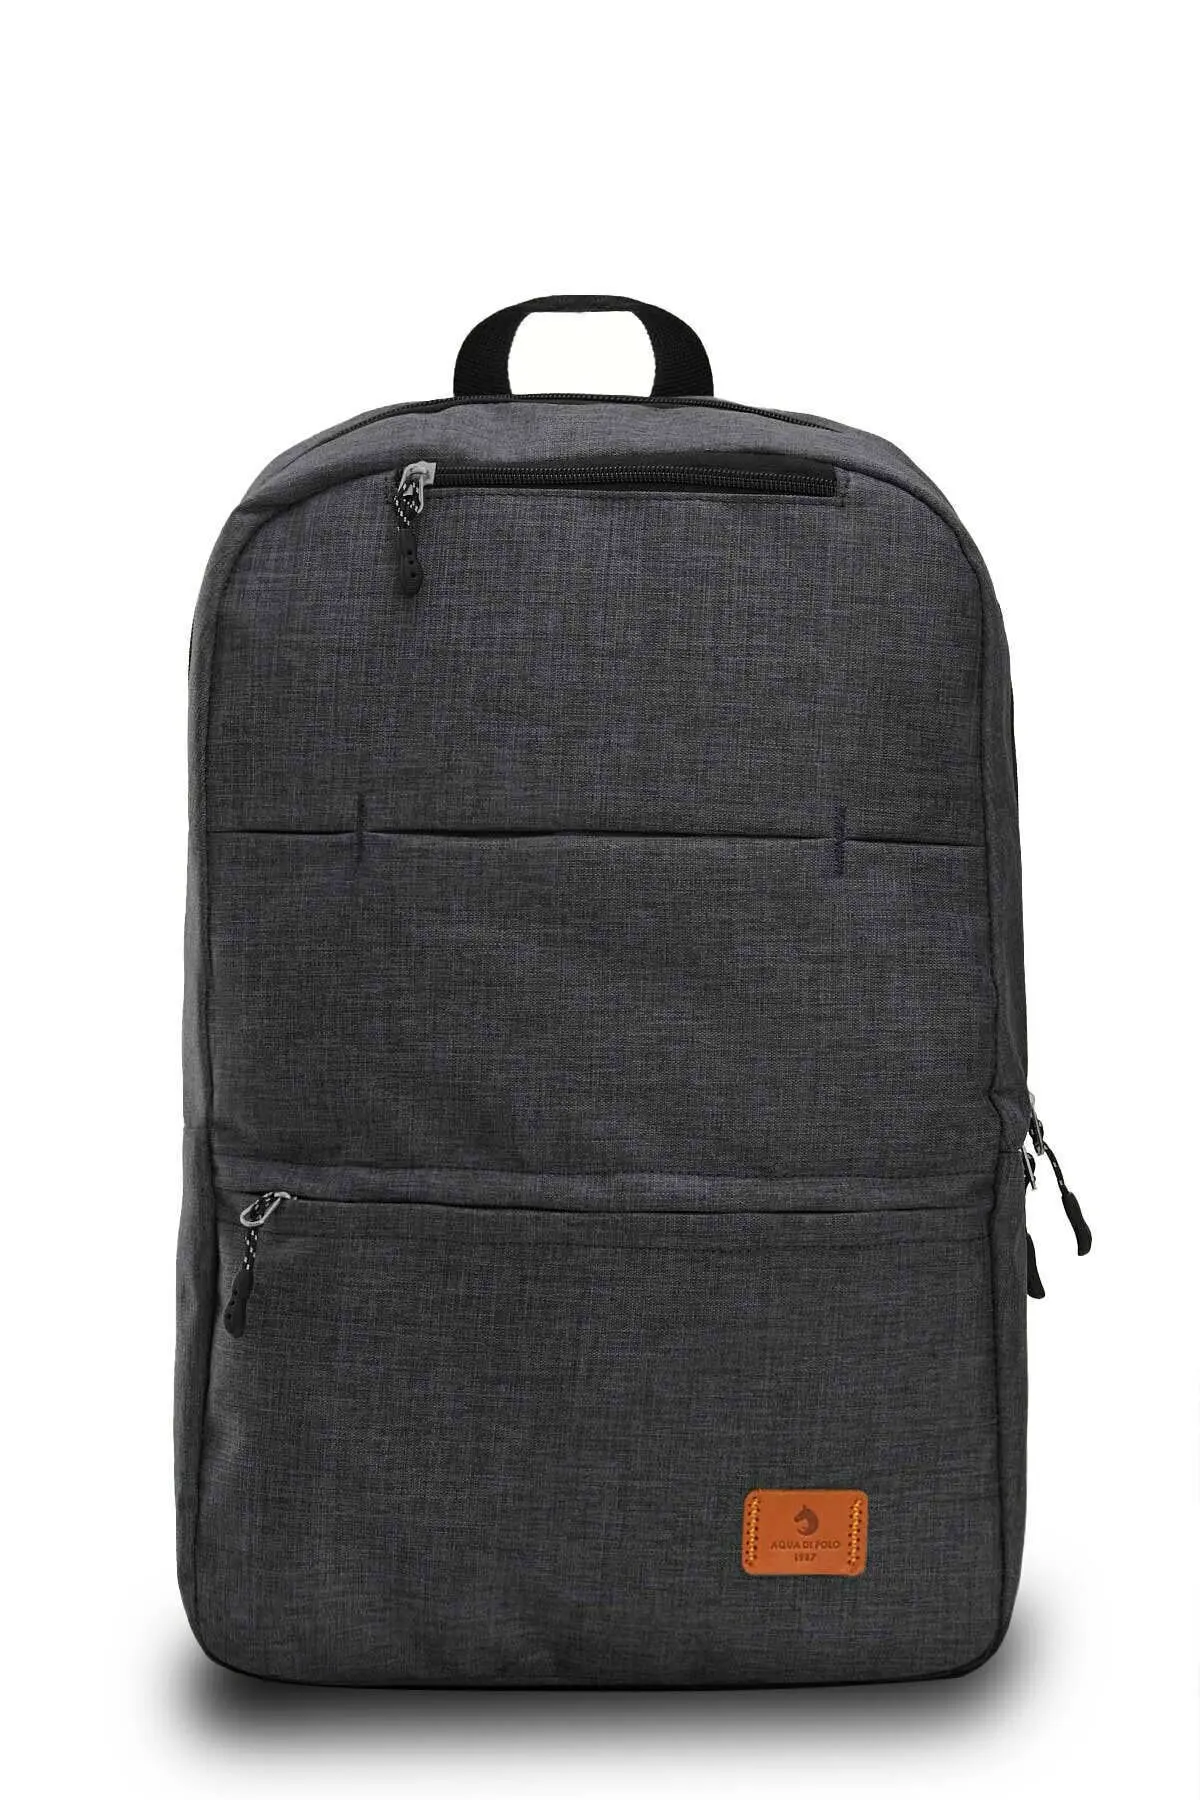 

Aqua Di Polo Backpack (Laptop,notebook, school, Sport) Easy to Carry Backpack with 1 Front pocket and 2 inner compartment